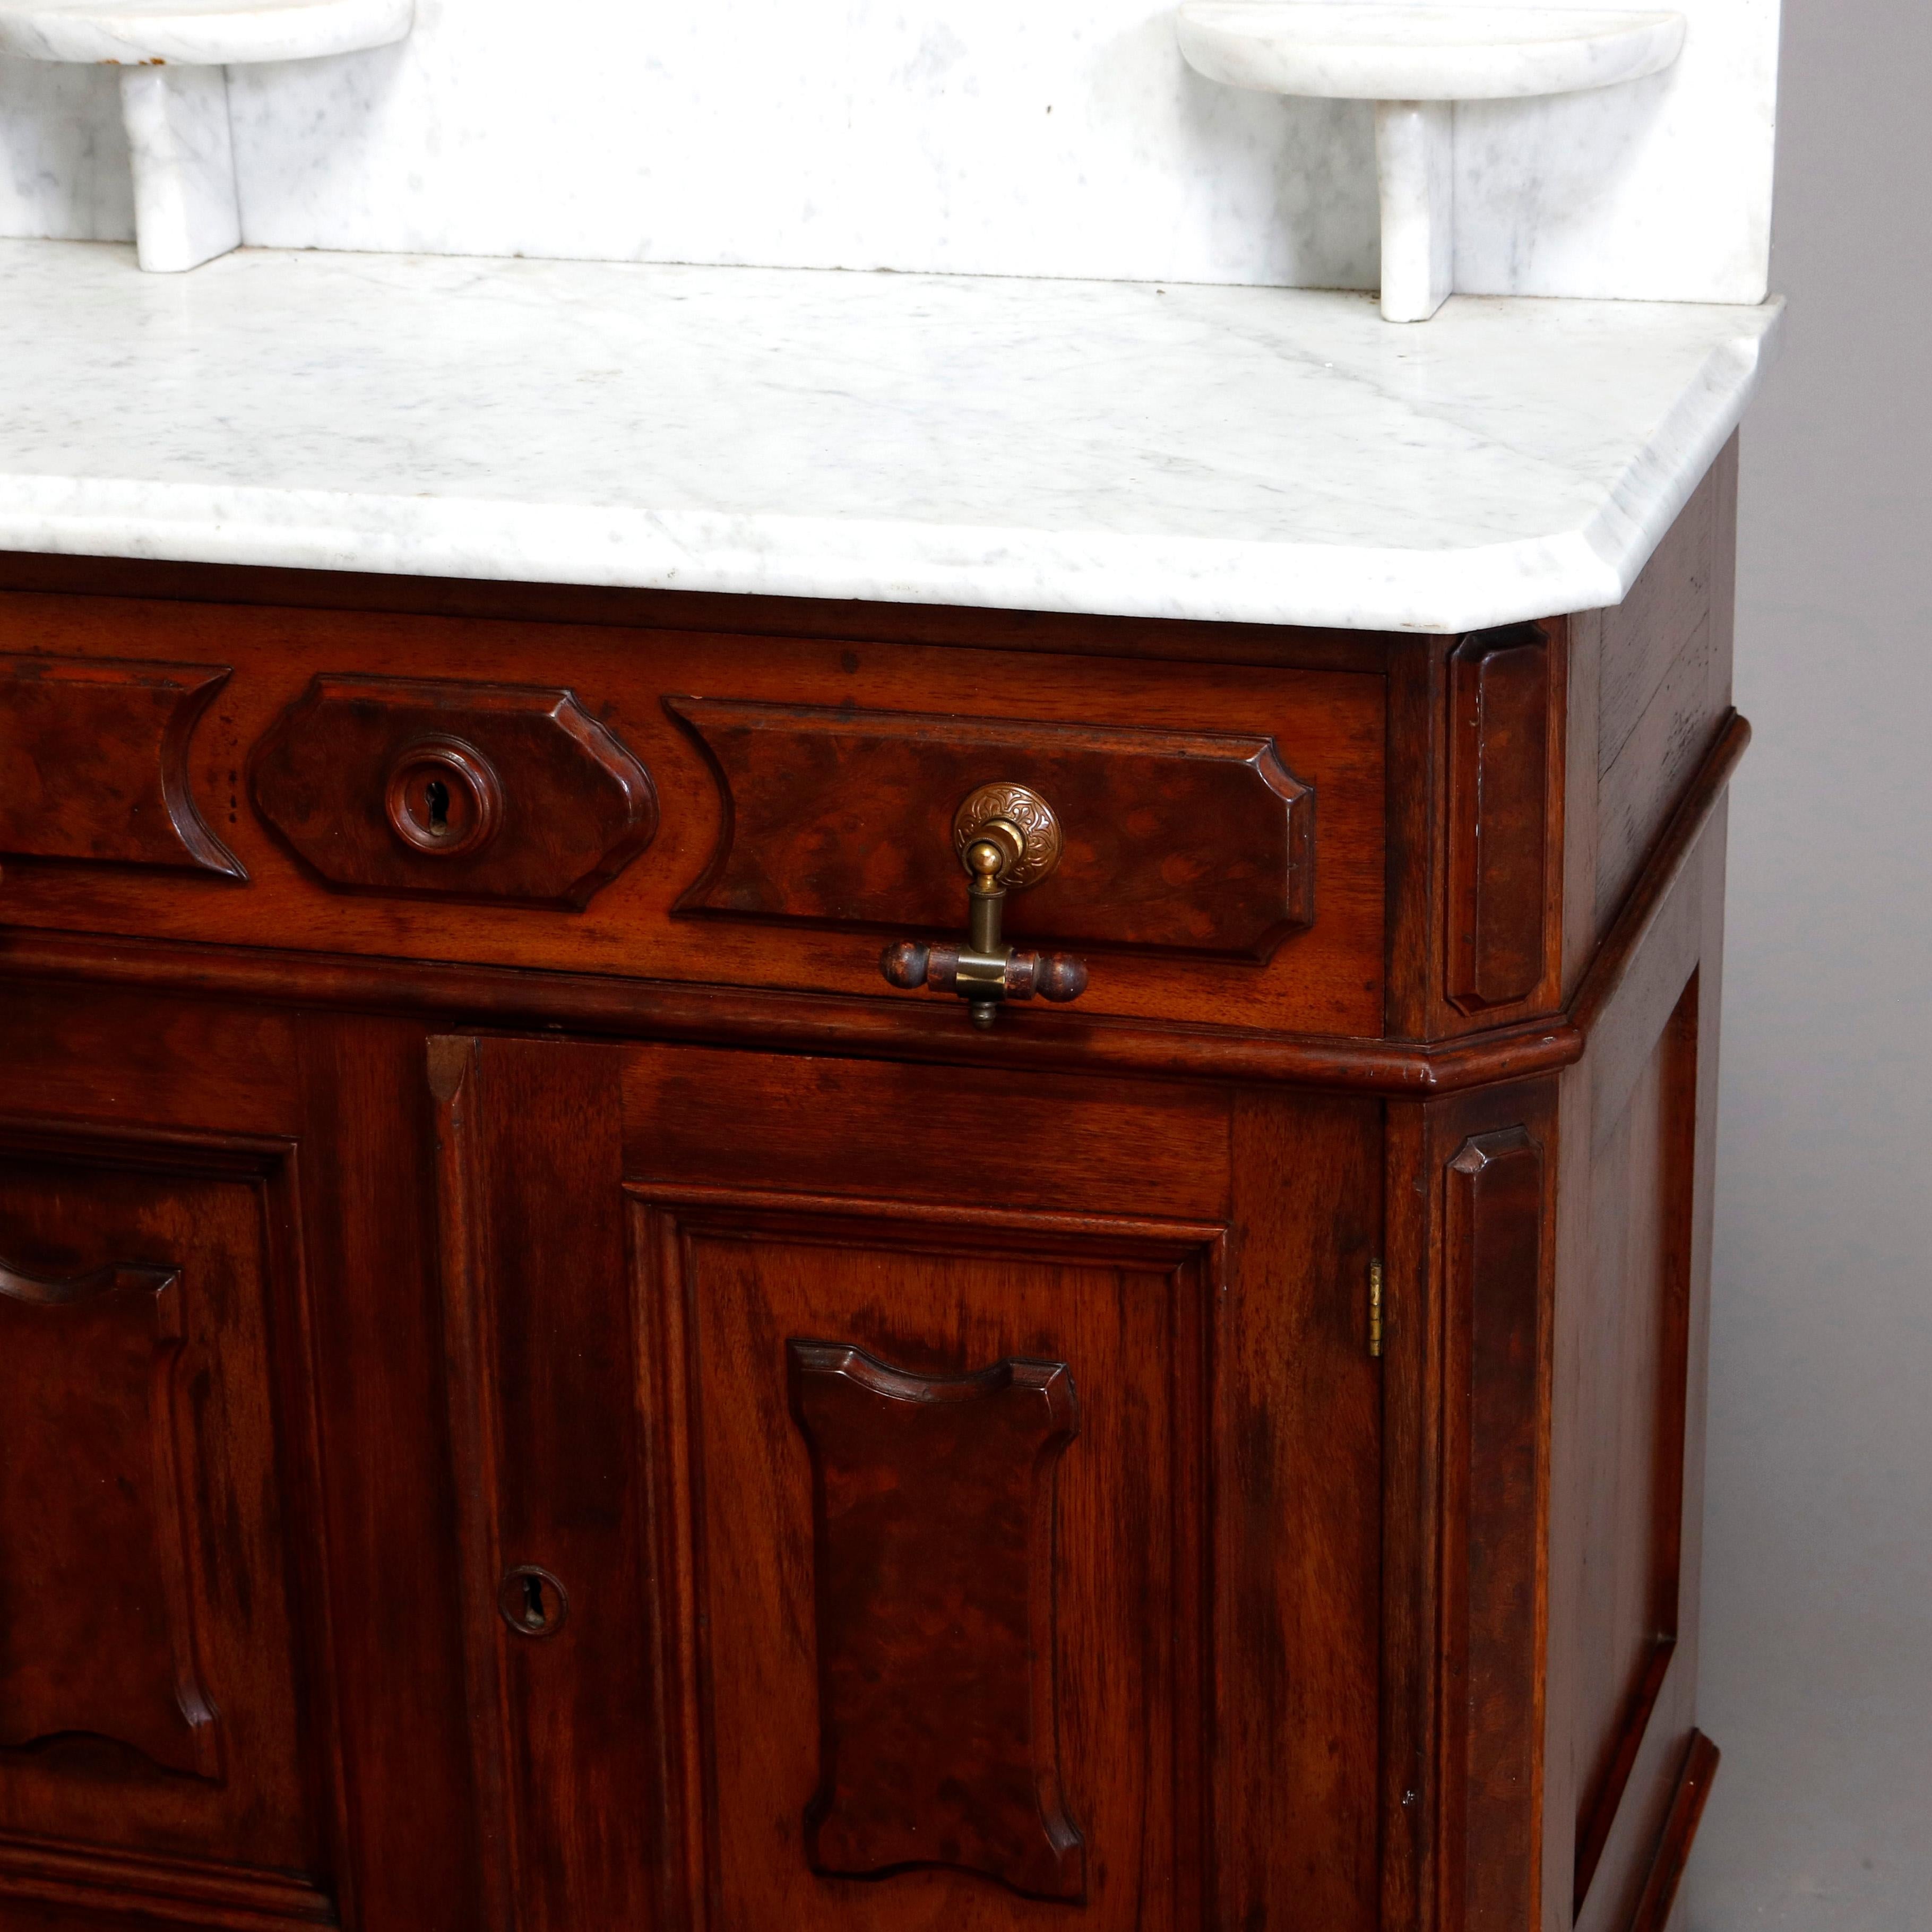 An antique Victorian washstand offers beveled marble top with backsplash and candle stands surmounting case with burl panels and having single upper long drawer over double door cabinet opening to shelved interior, c1890

Measures - 42.25